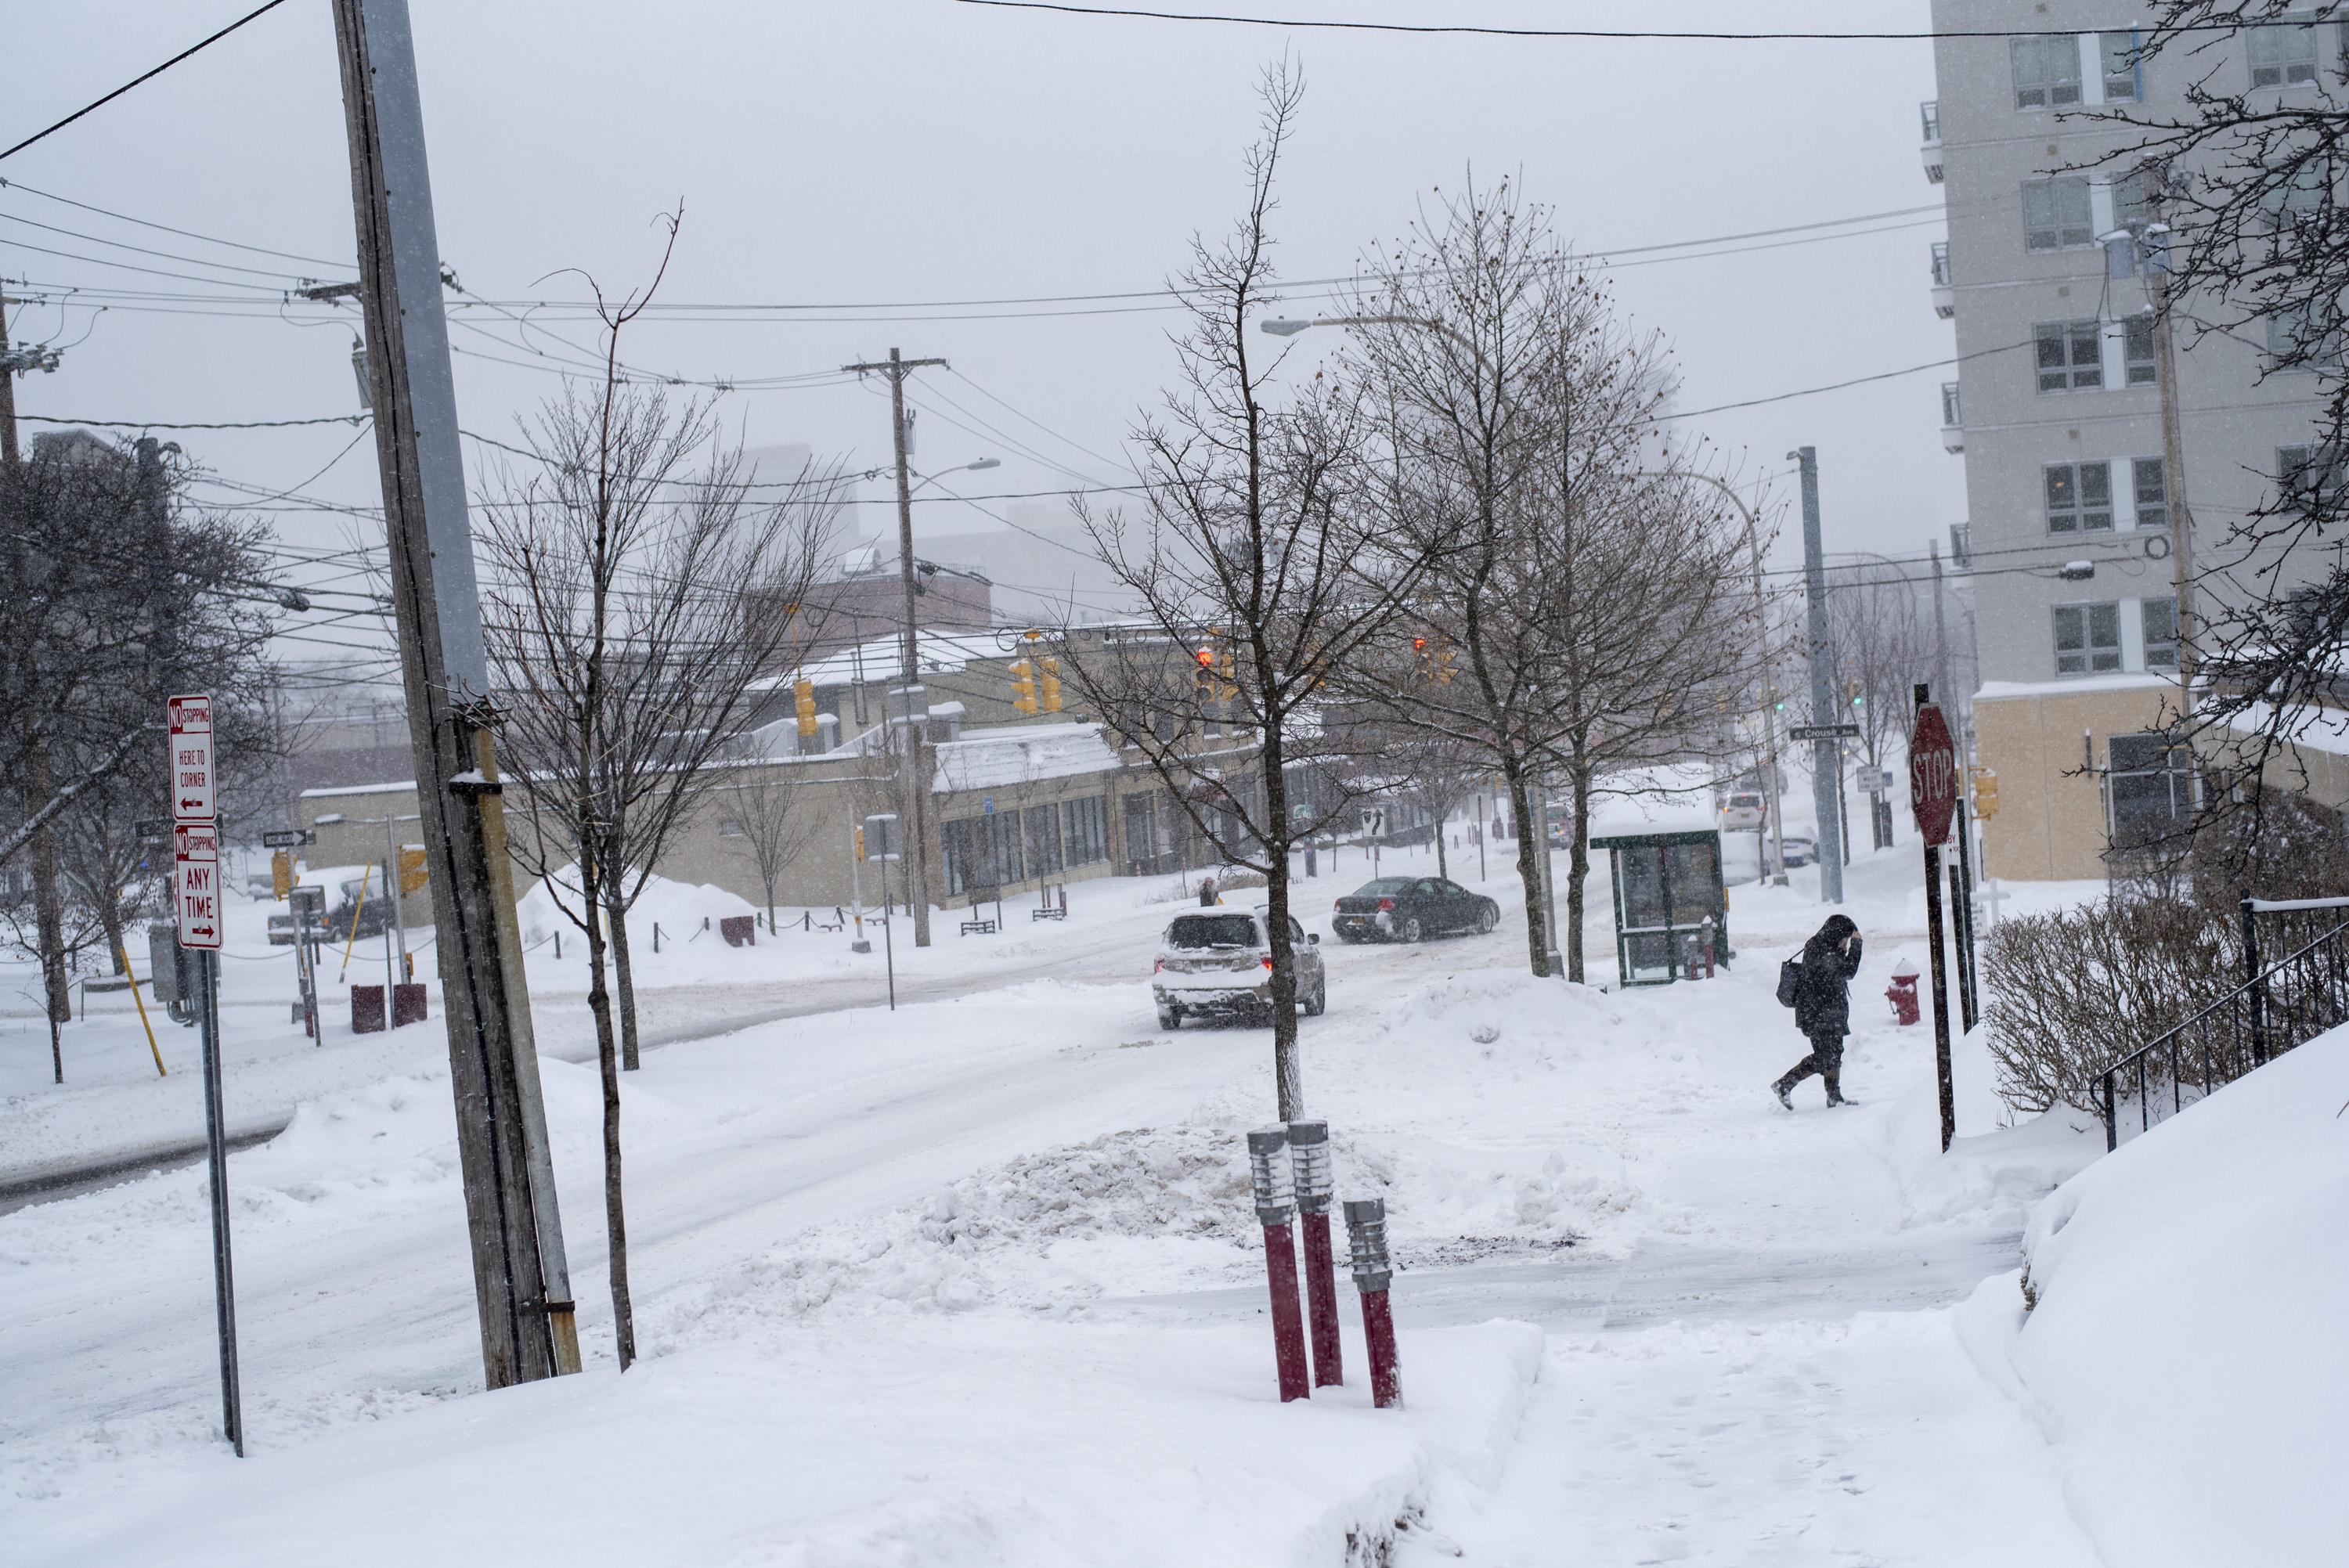 Syracuse University canceled Friday clases as more than a foot of snow was burying Syracuse.